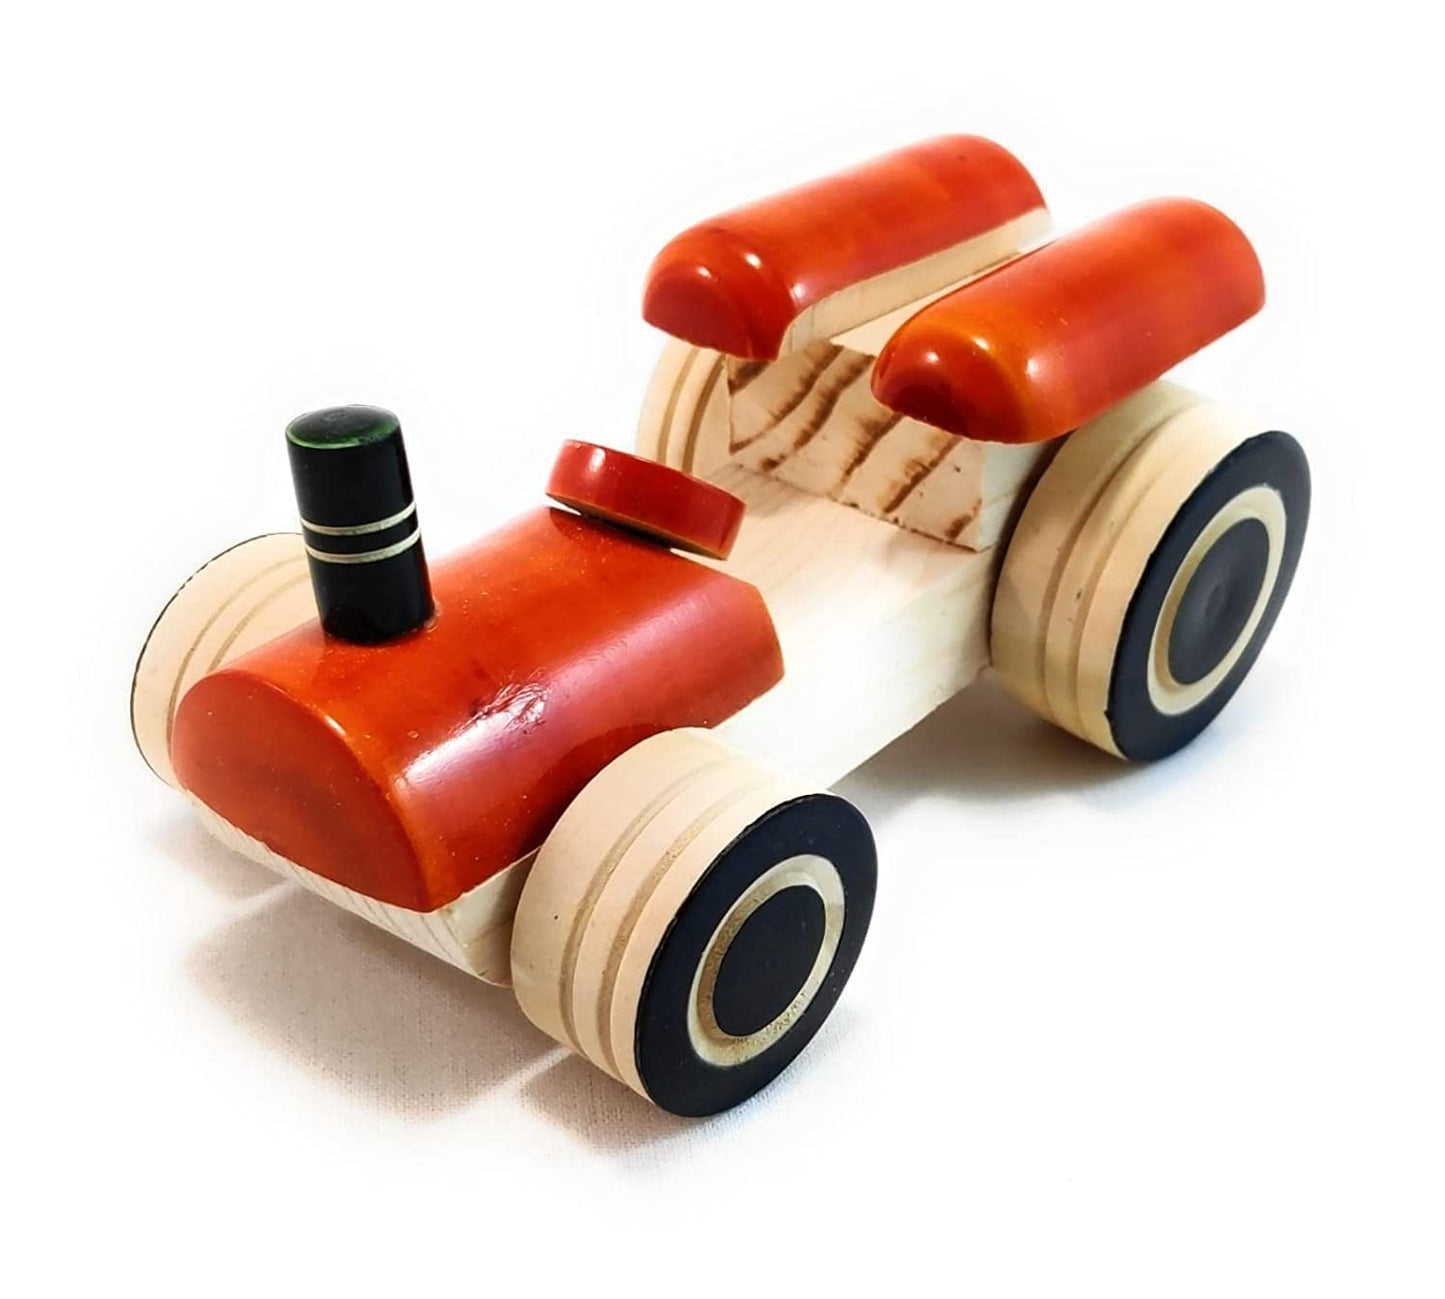 Wooden Cars, Wooden Toys For Kids, Wooden Tractor Toys For Boys & Girls